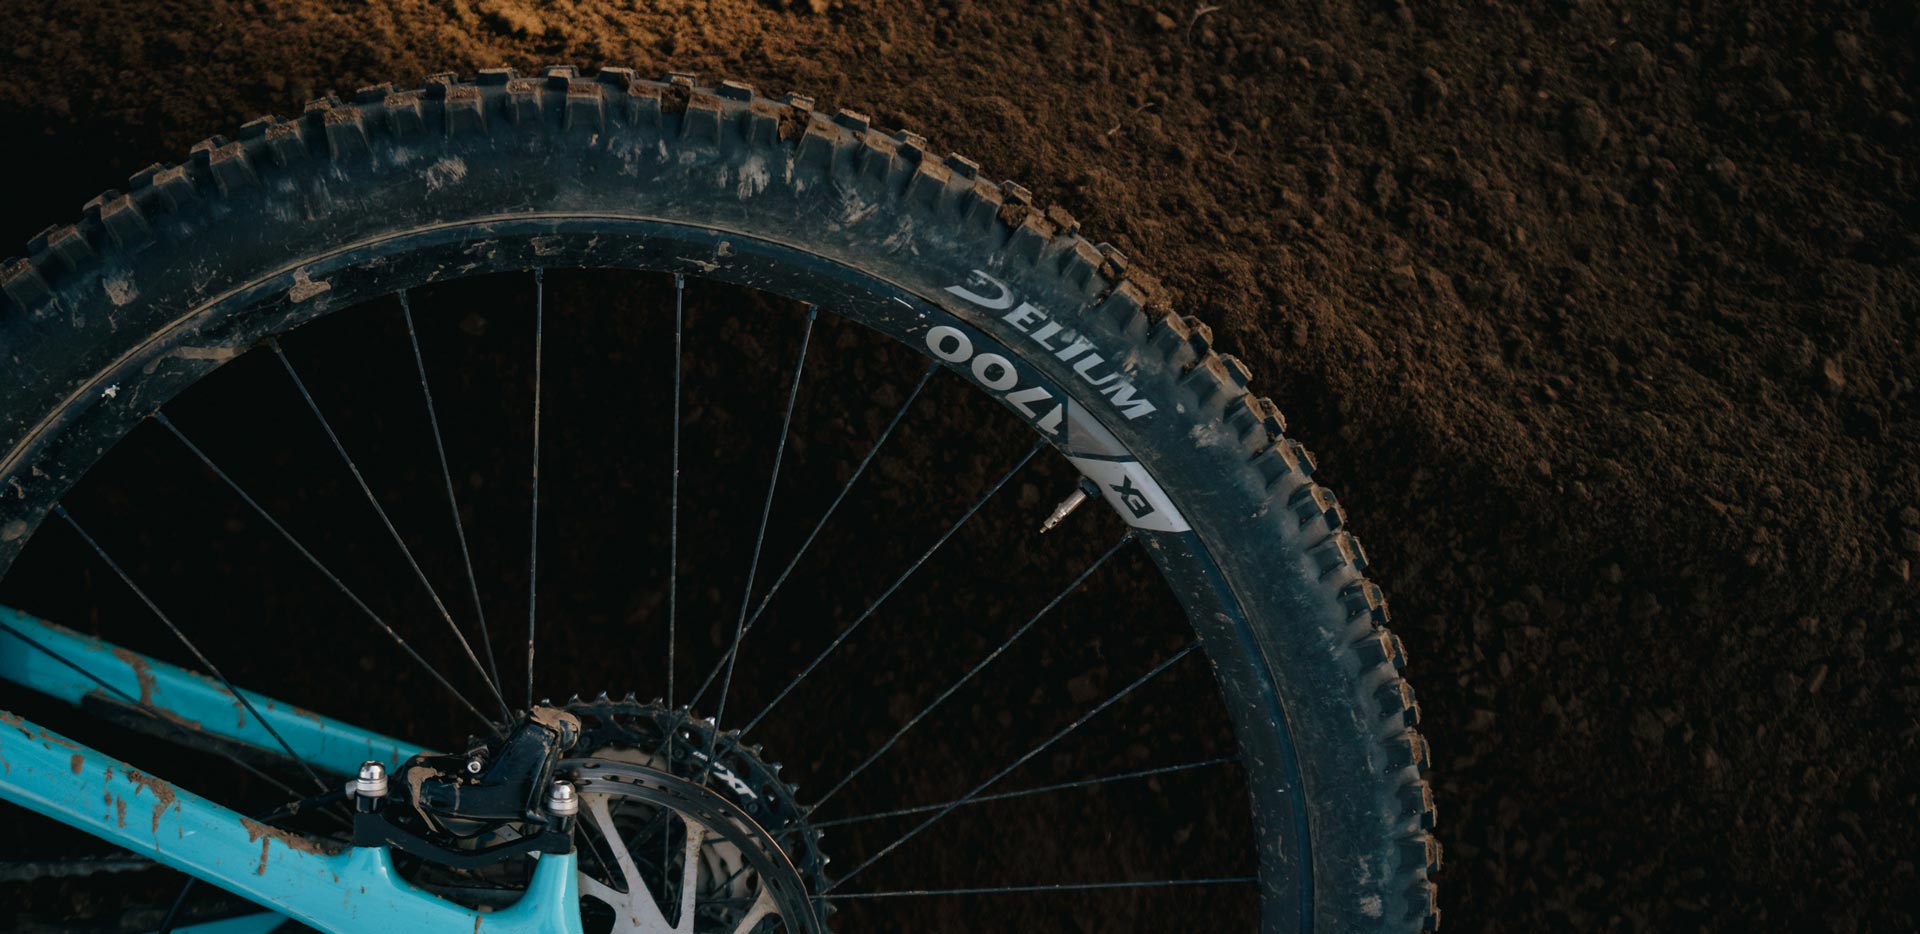 Review: Delium Rugged All-Round Tires